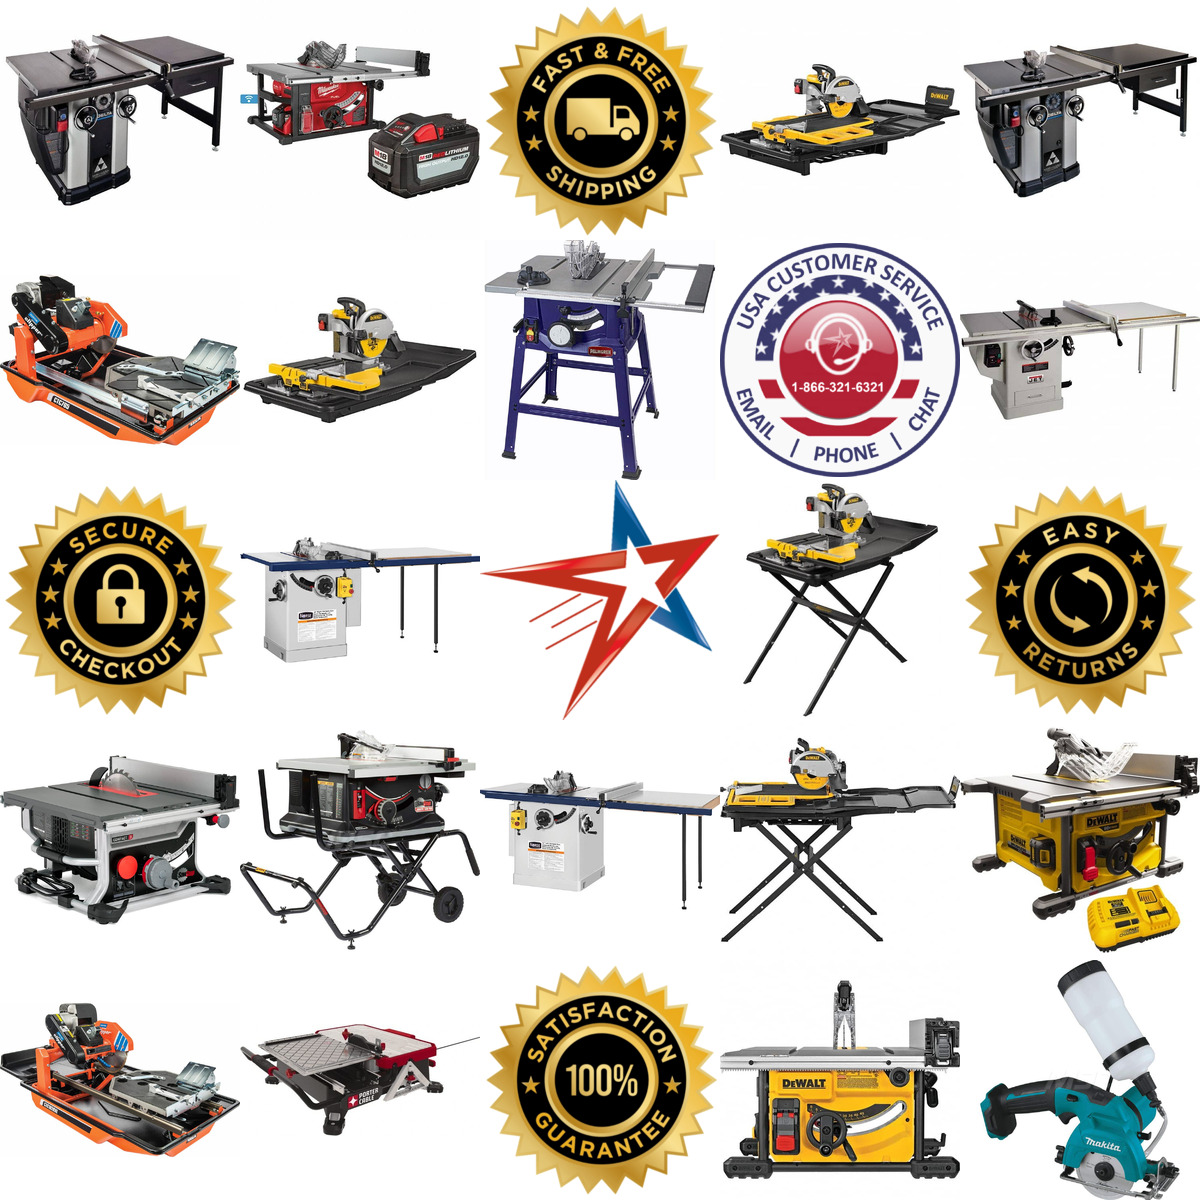 A selection of Table and Tile Saws products on GoVets